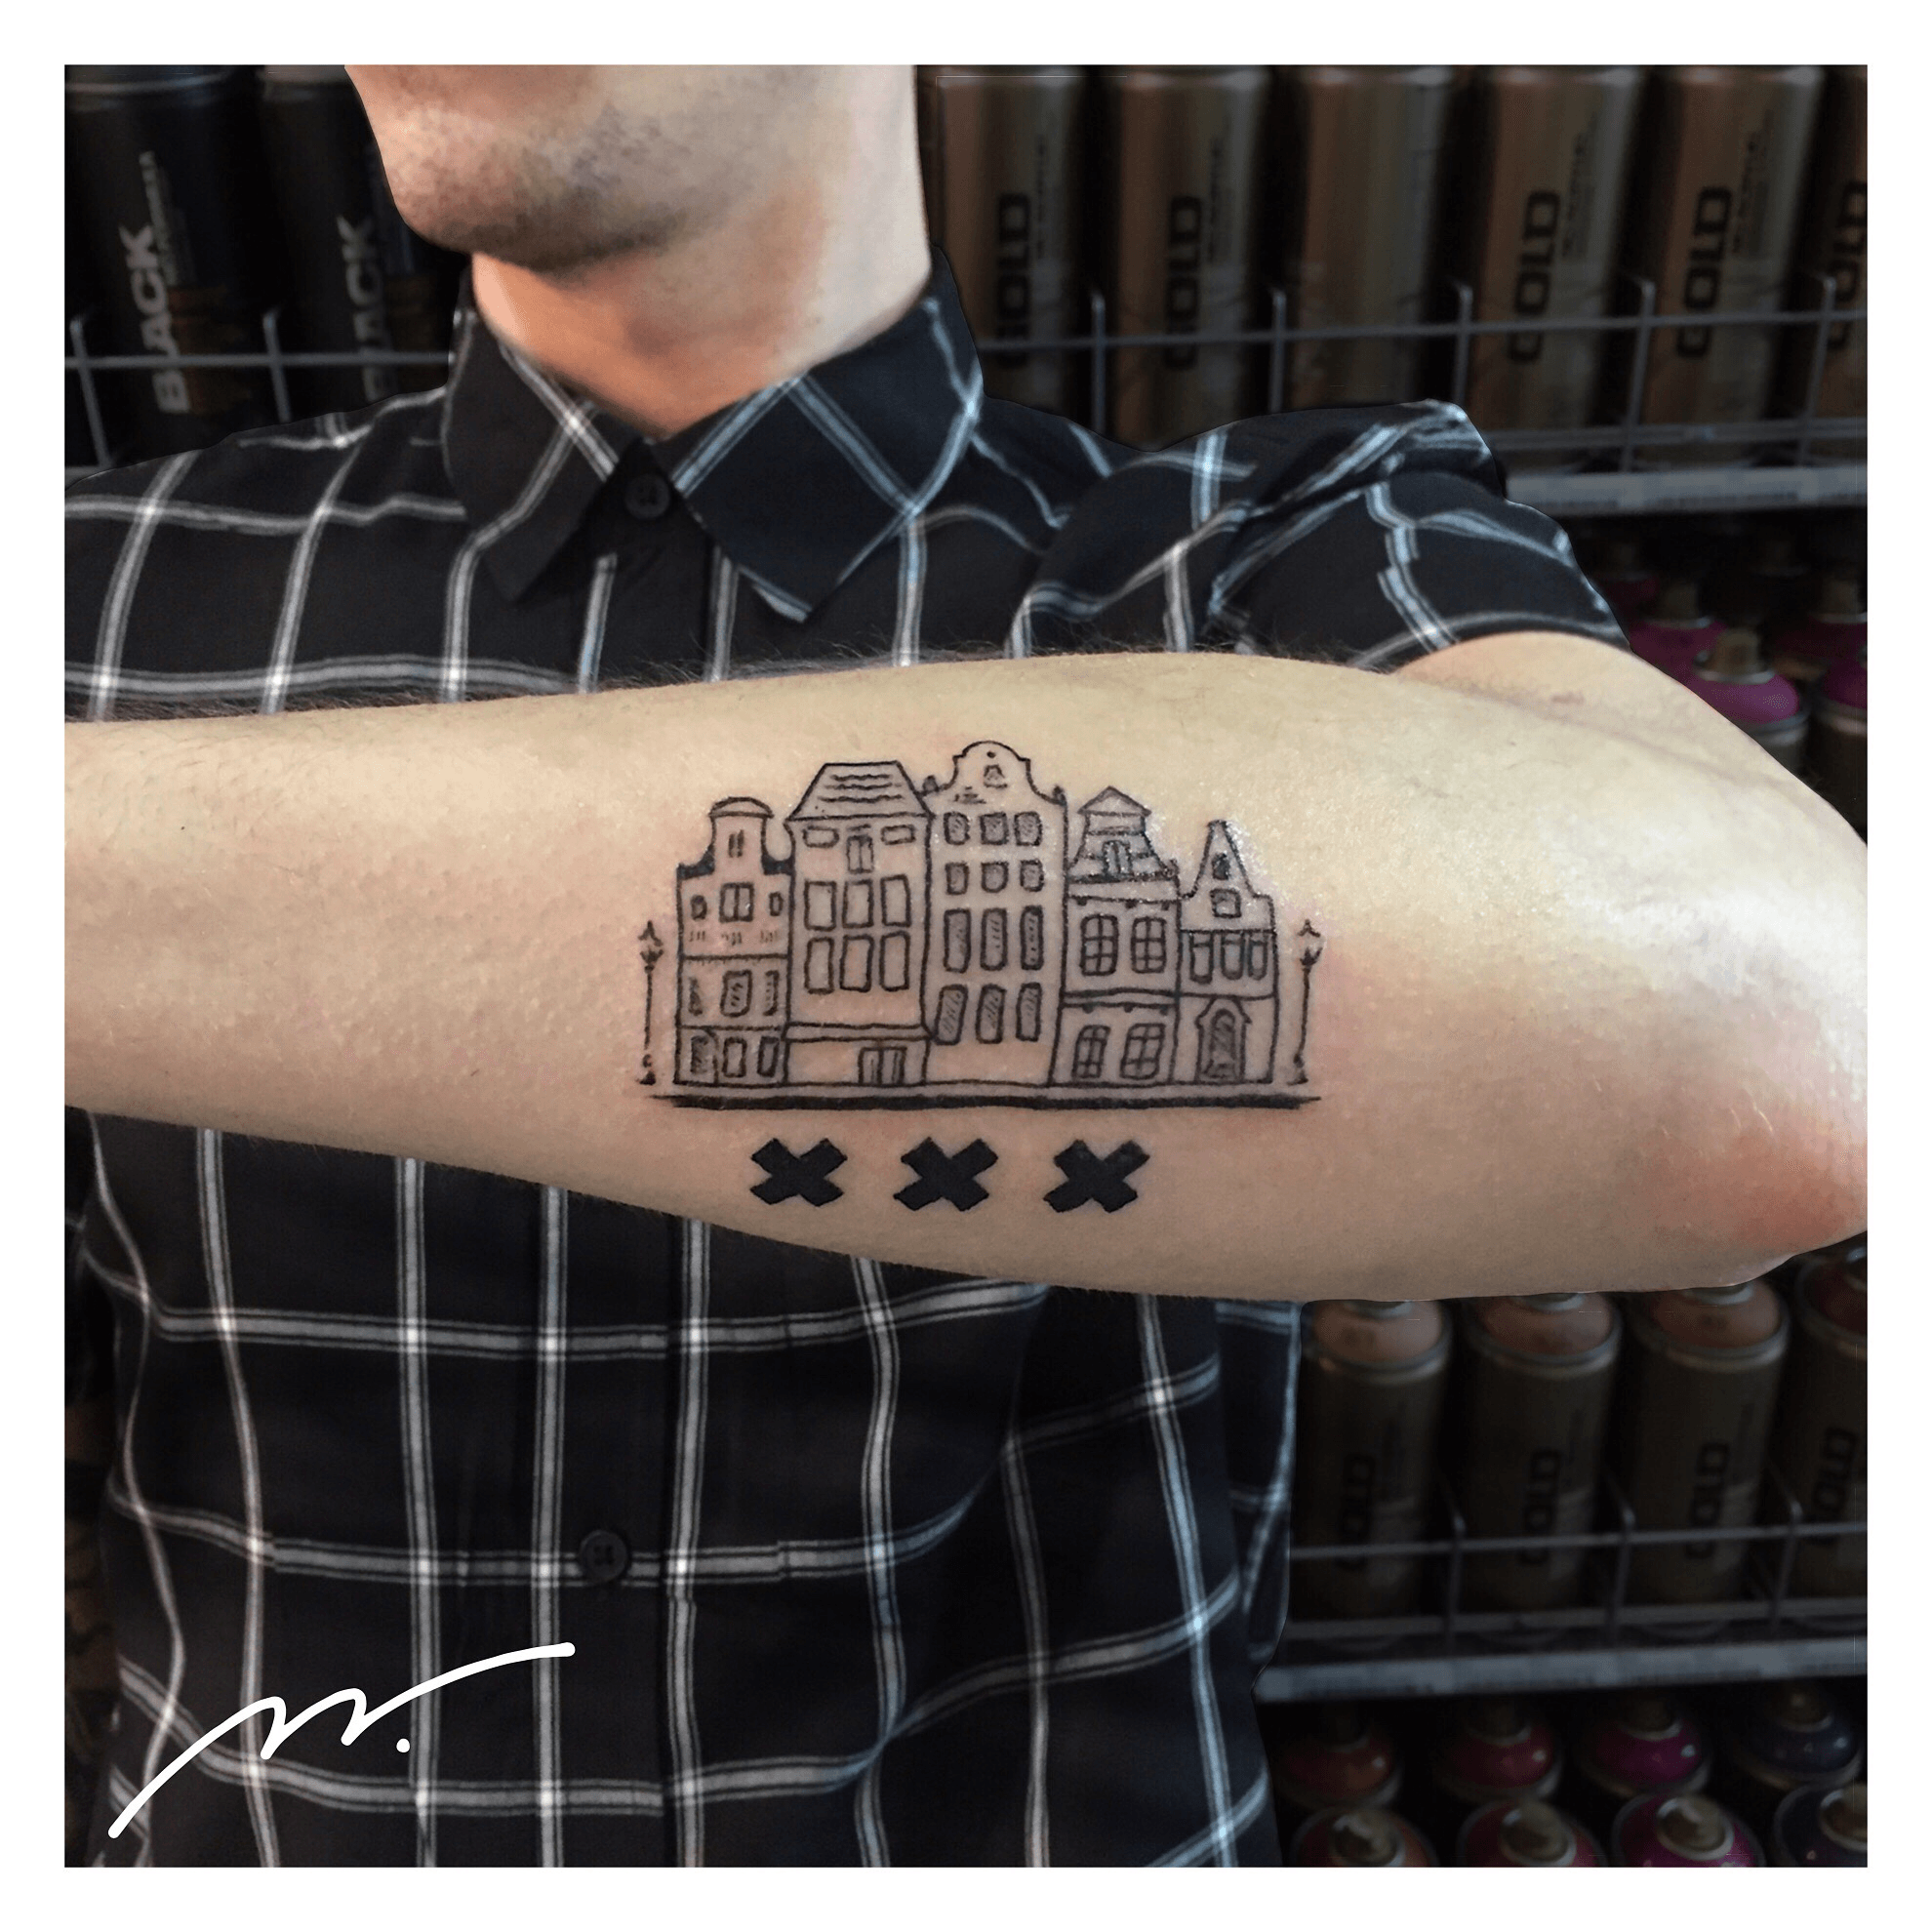 Charmed Life Tattoo on Twitter Mendls Box from the Grand Budapest Hotel  movie by Mandee Robinson aka mandeeejane   For your next appointment   httpstcoimvMLhcKLi httpstcoEwLxr6bVPM  Twitter